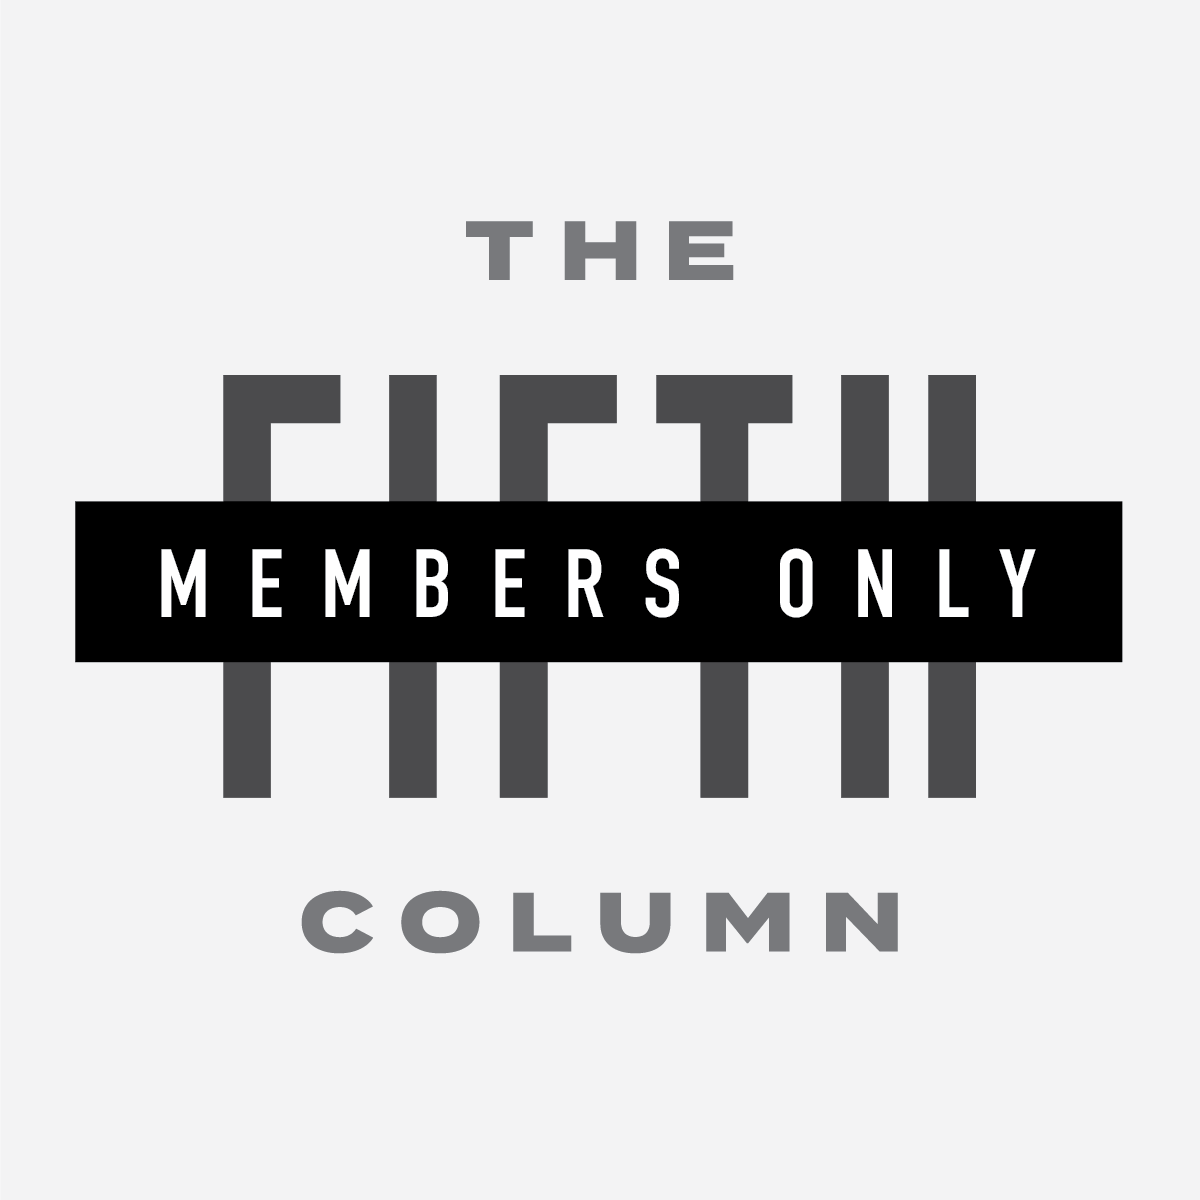 Members Only #180 - The Fifth on Zoom! With Ben Dreyfuss! It's a Rebroadcast!